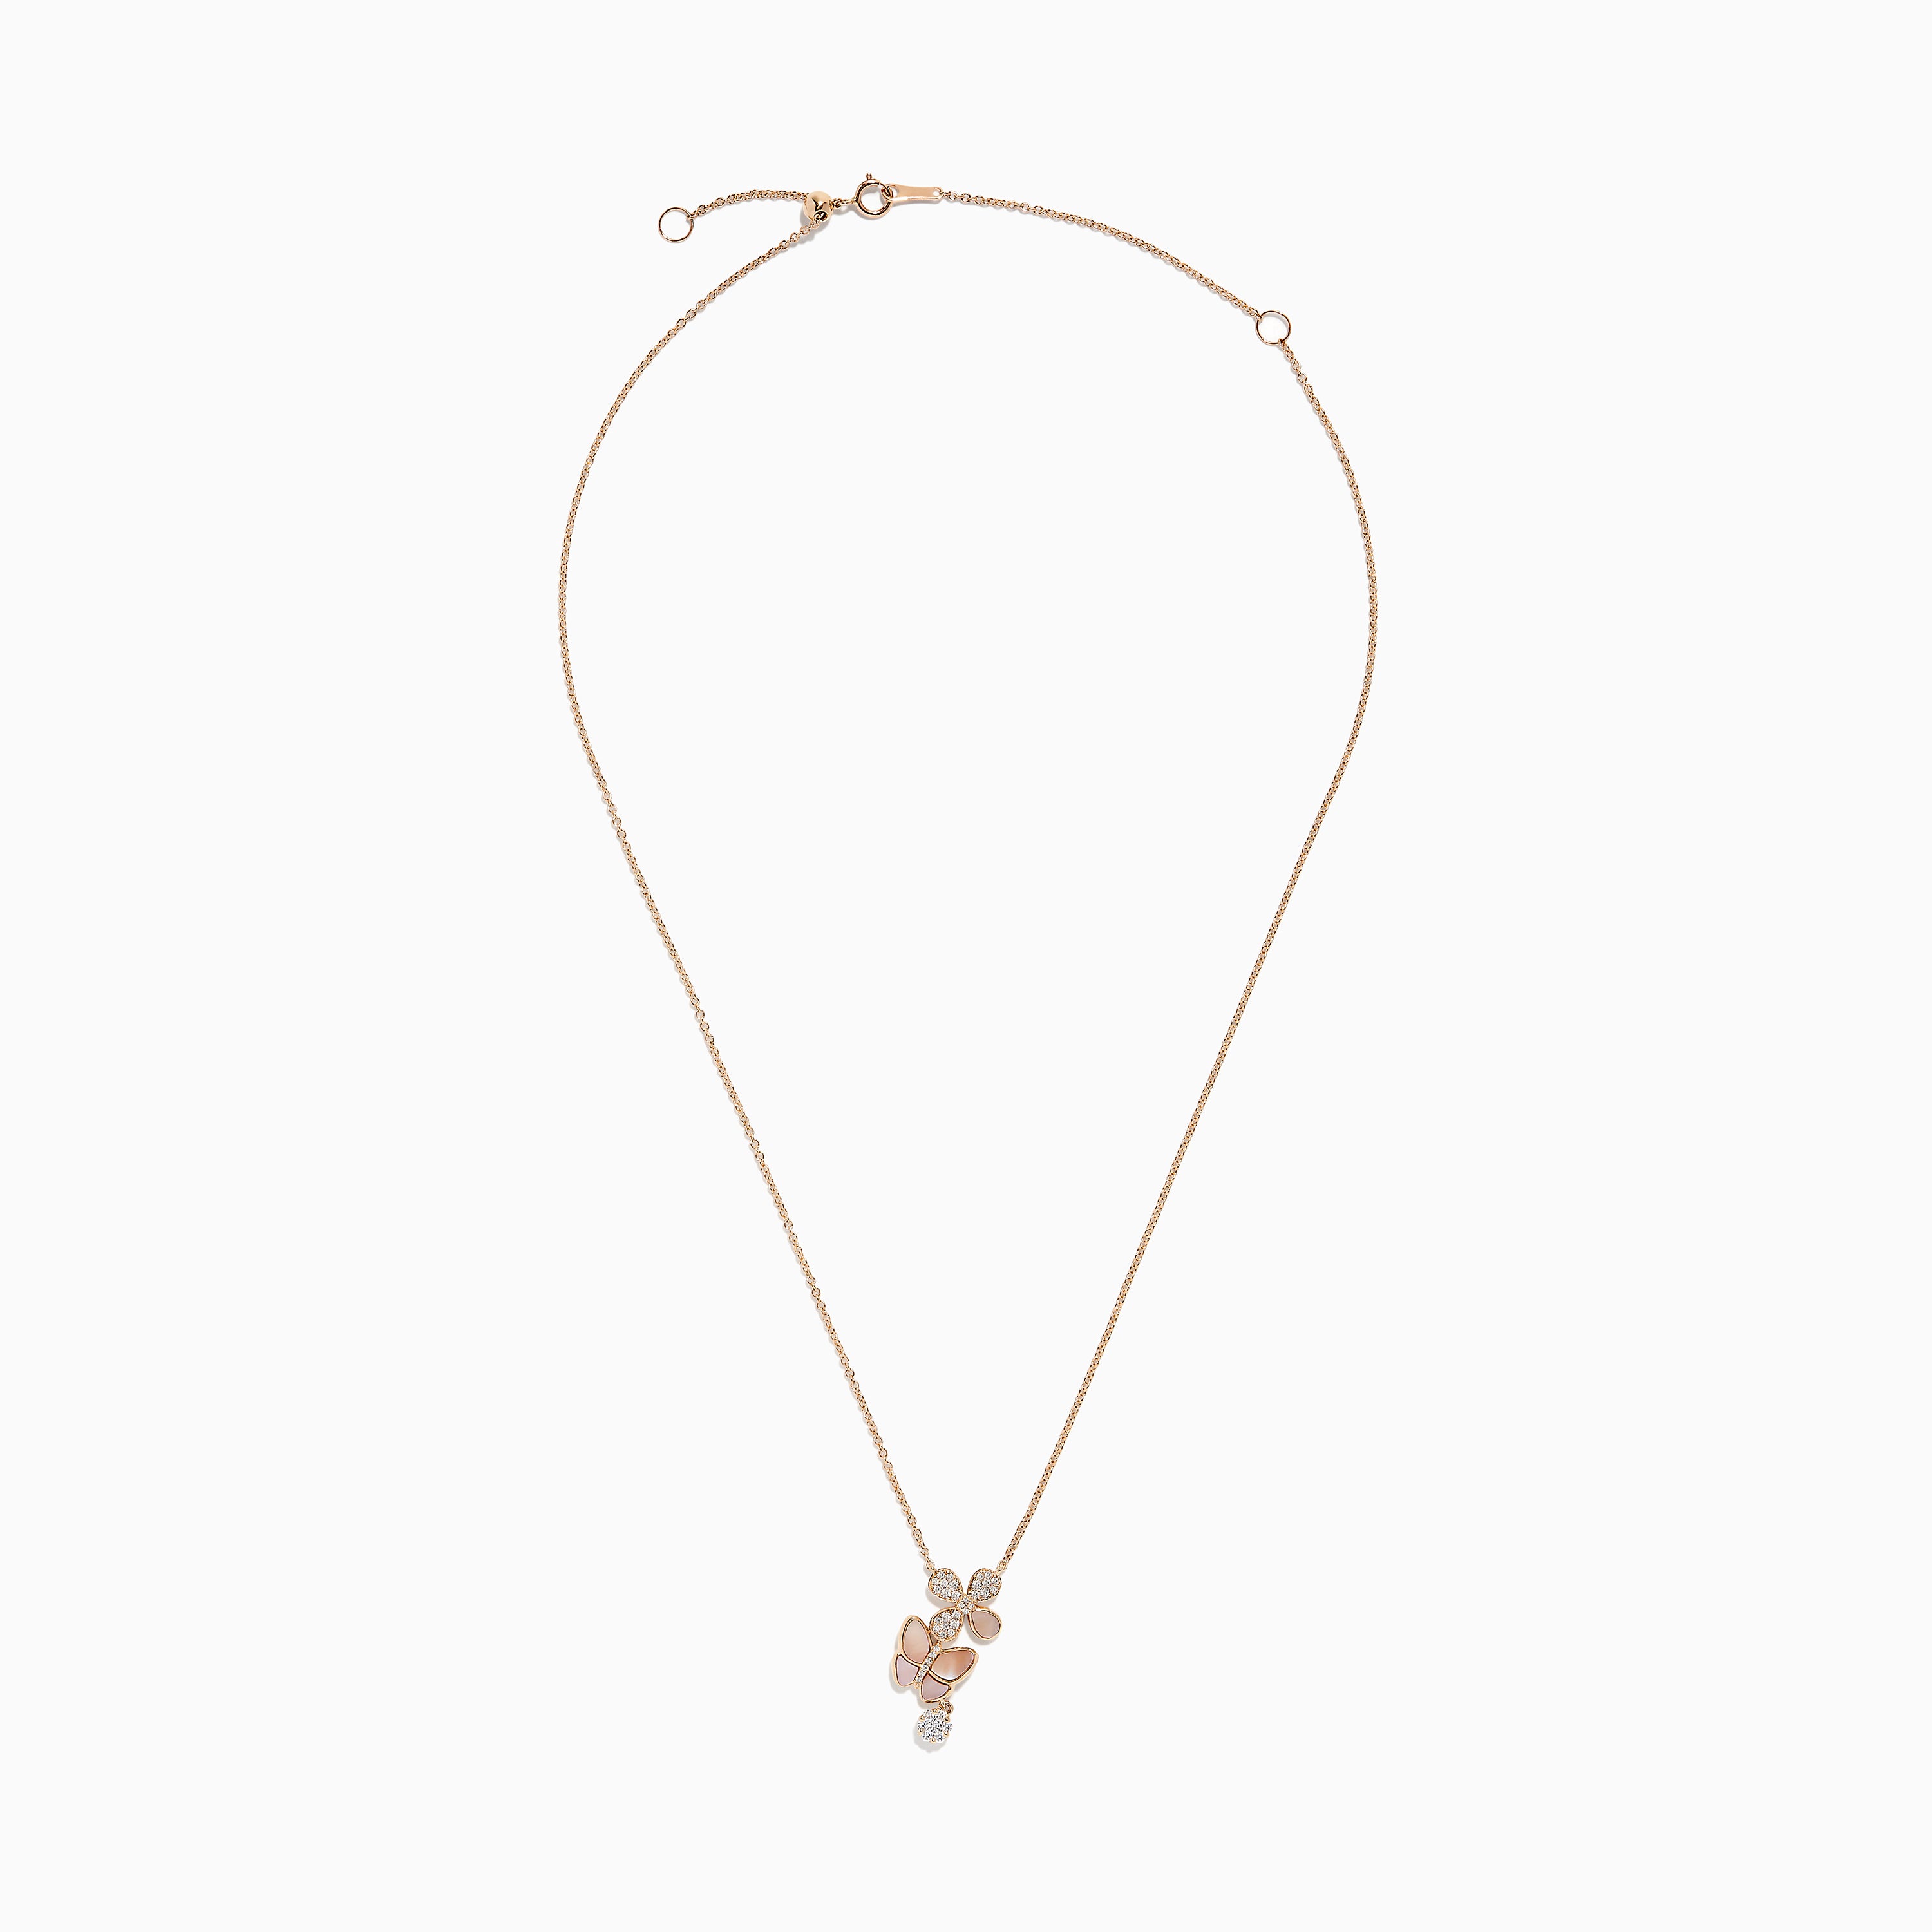 Butterfly Necklace with Pave Diamond in 14K Yellow Gold